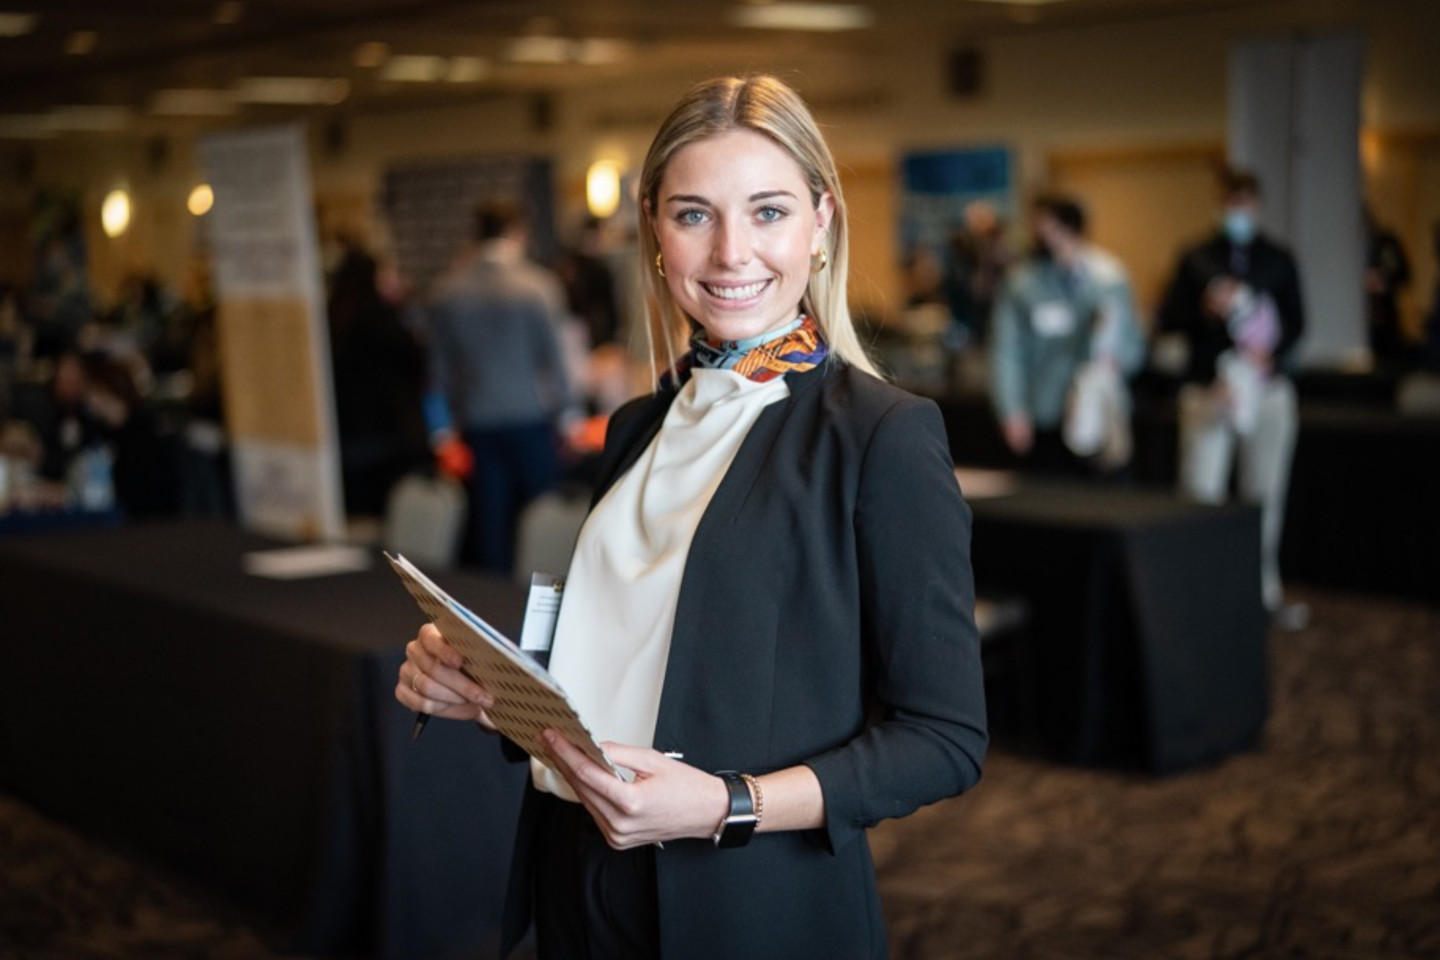 WMU student in business suit at career fair